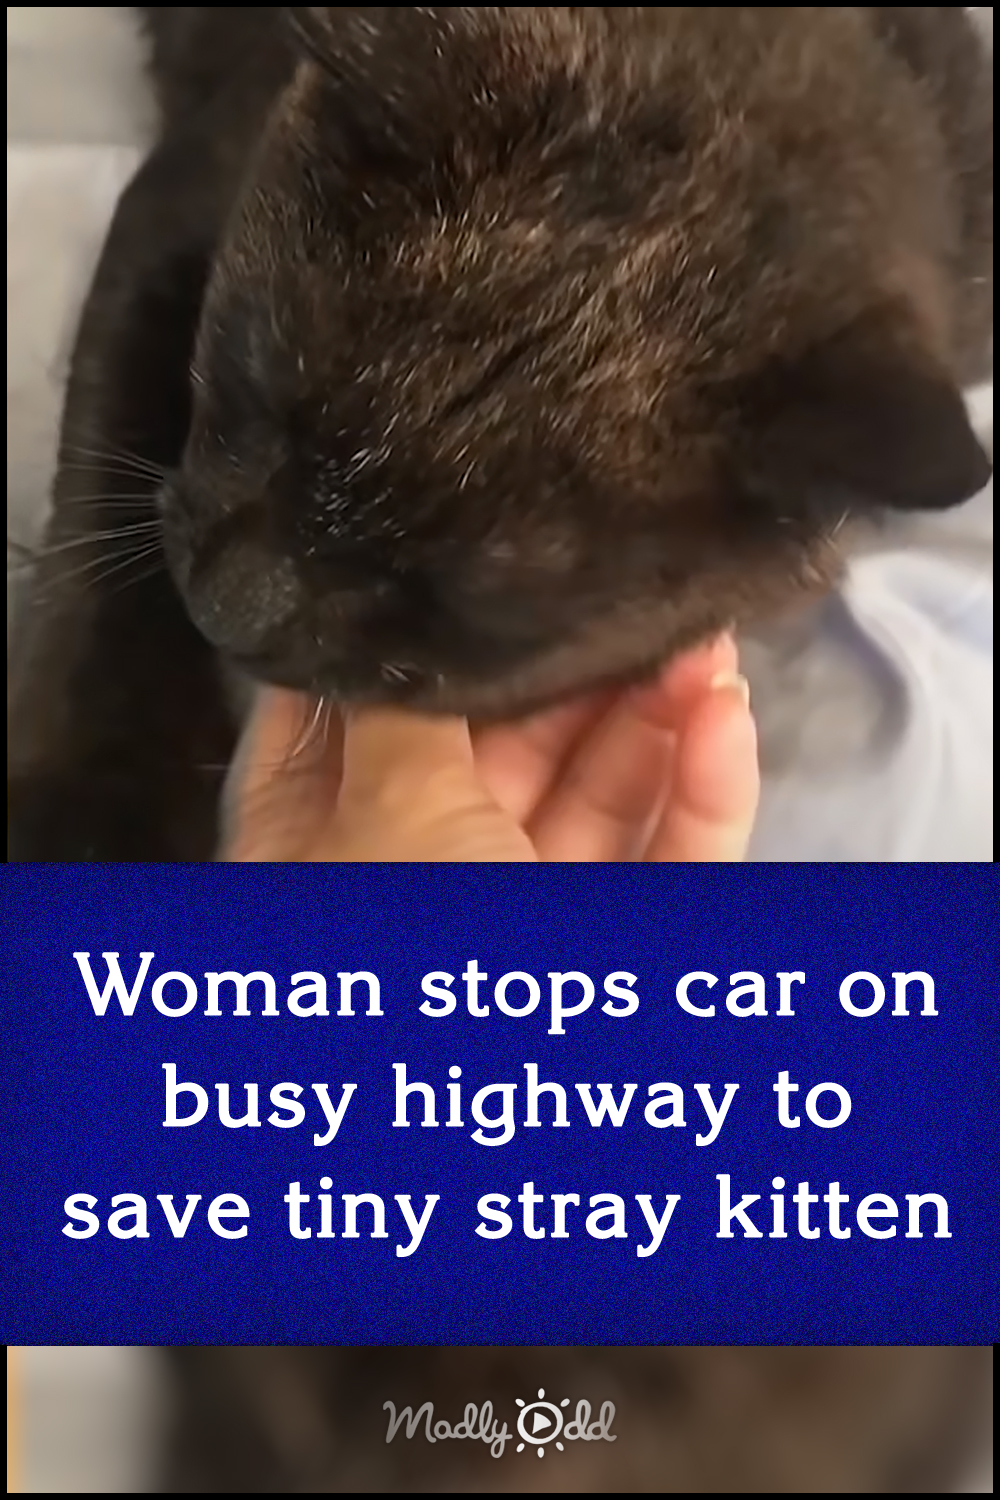 Woman stops car on busy highway to save tiny stray kitten